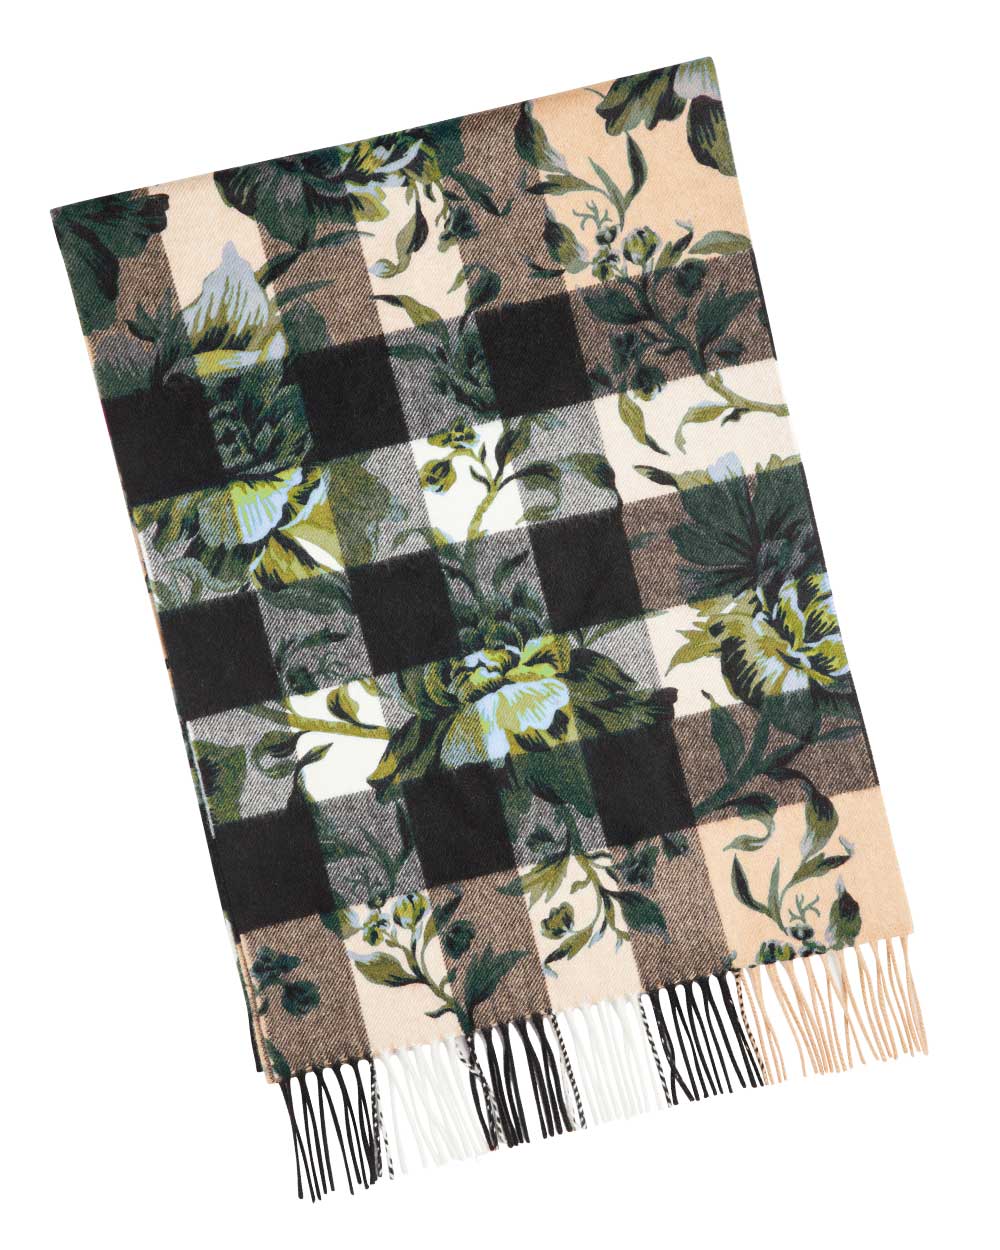 Burberry scarf, $1165, from T Galleria by DFS